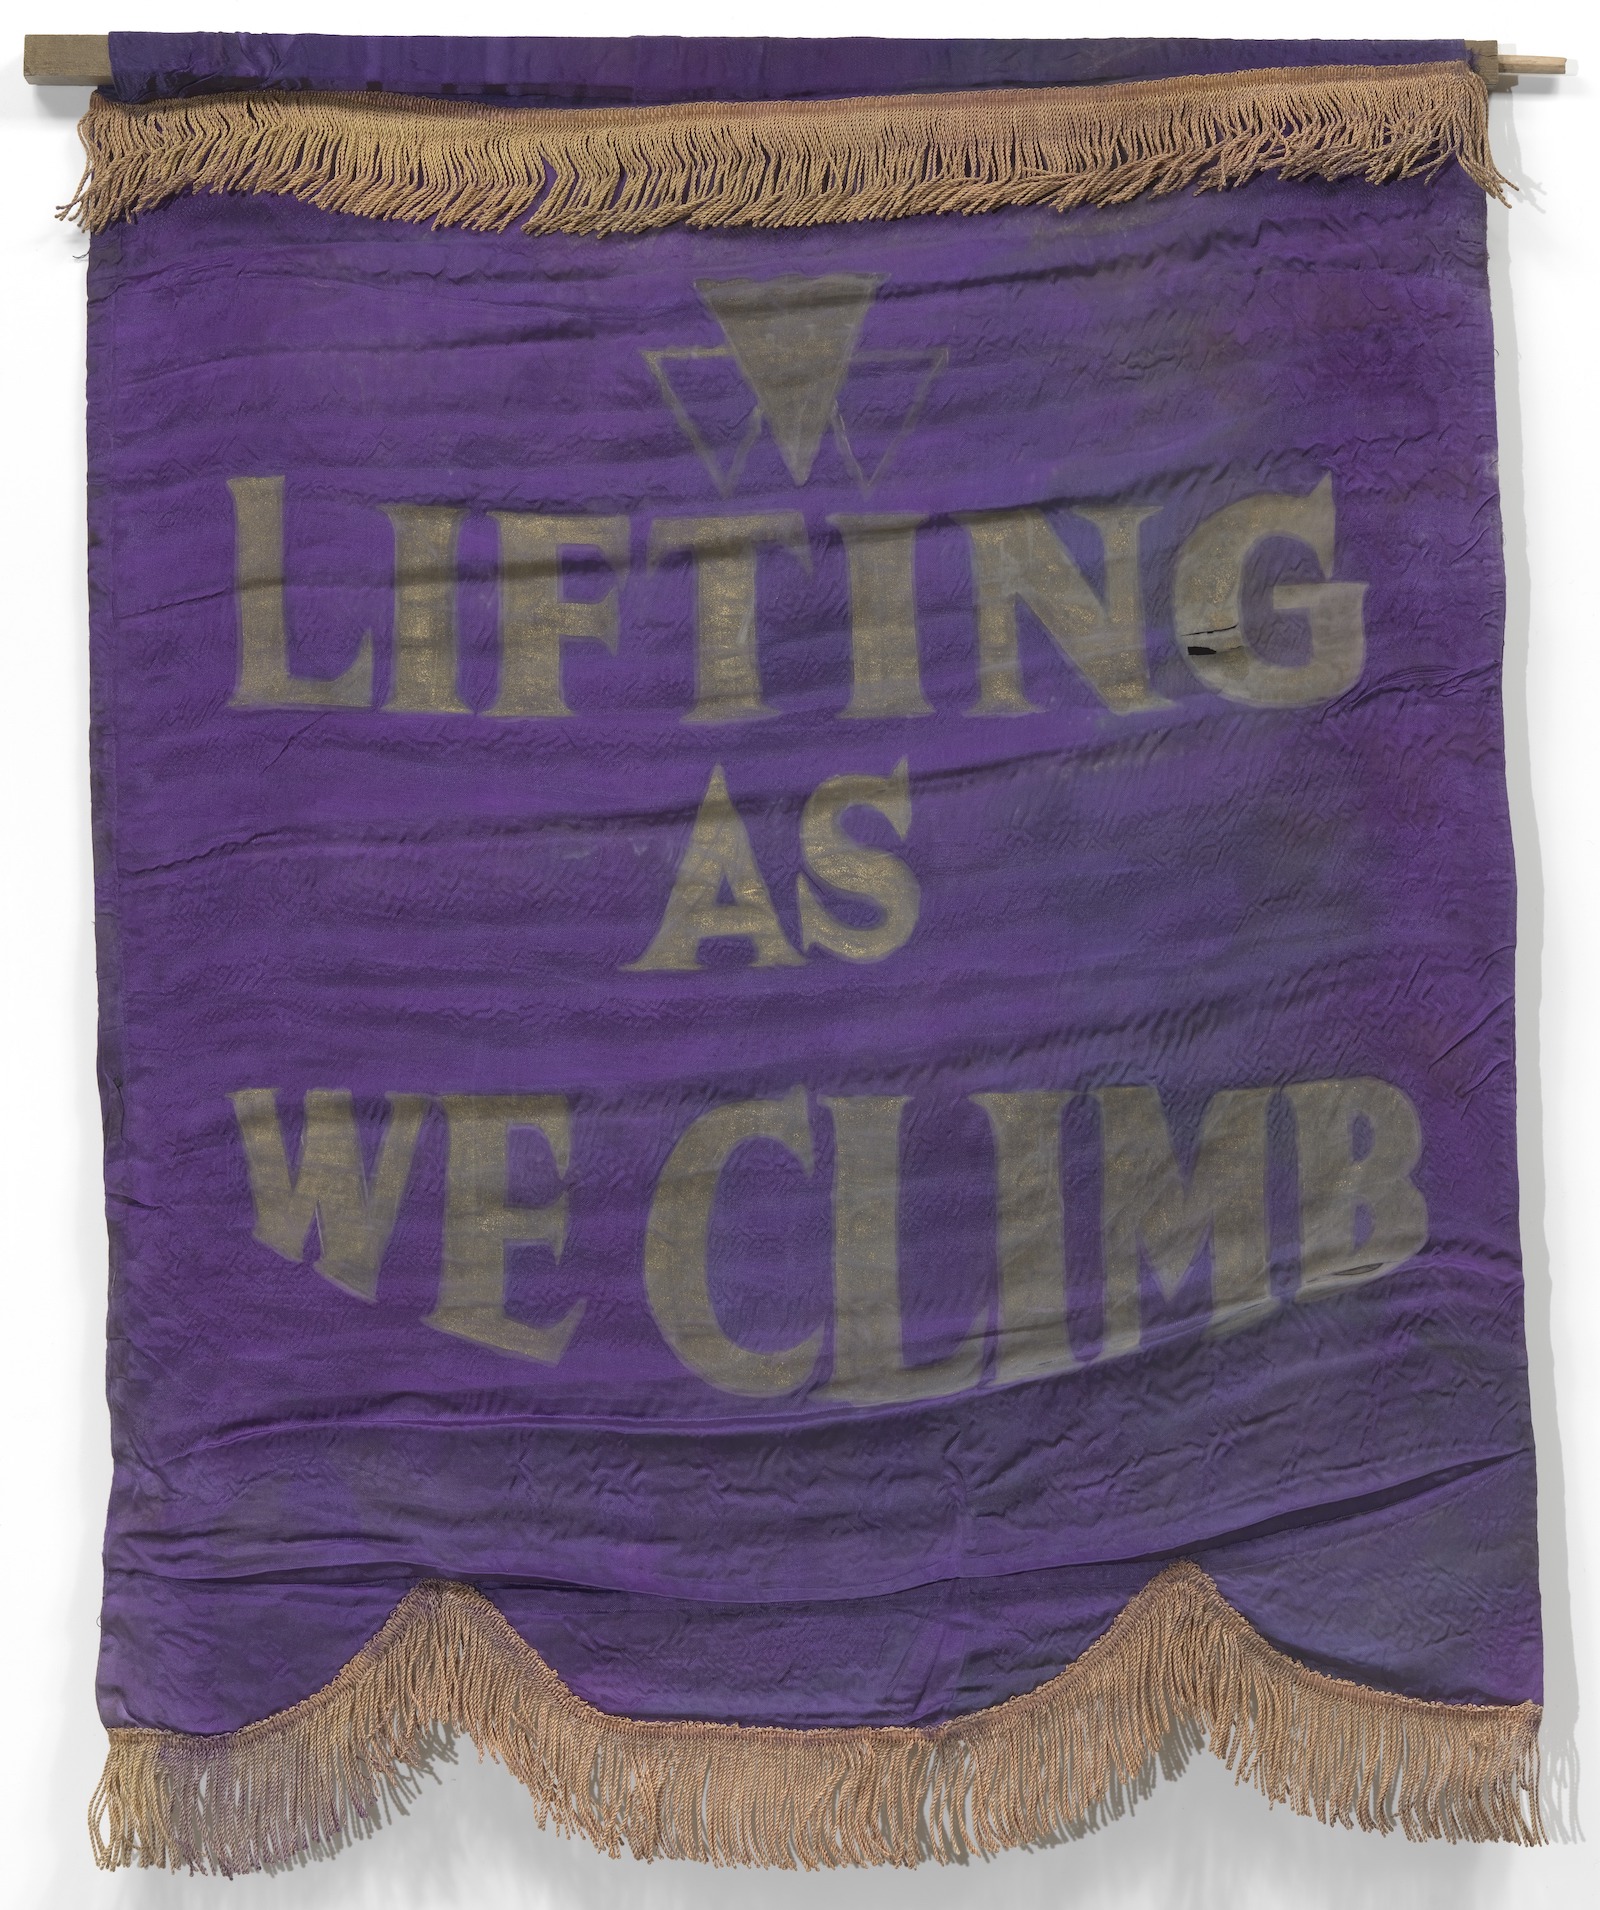 ‘Lifting as we Climb’: Banner with motto of the National Association of Colored Women's Clubs, c. 1924. Collection of the Smithsonian National Museum of African American History and Culture (CC0).